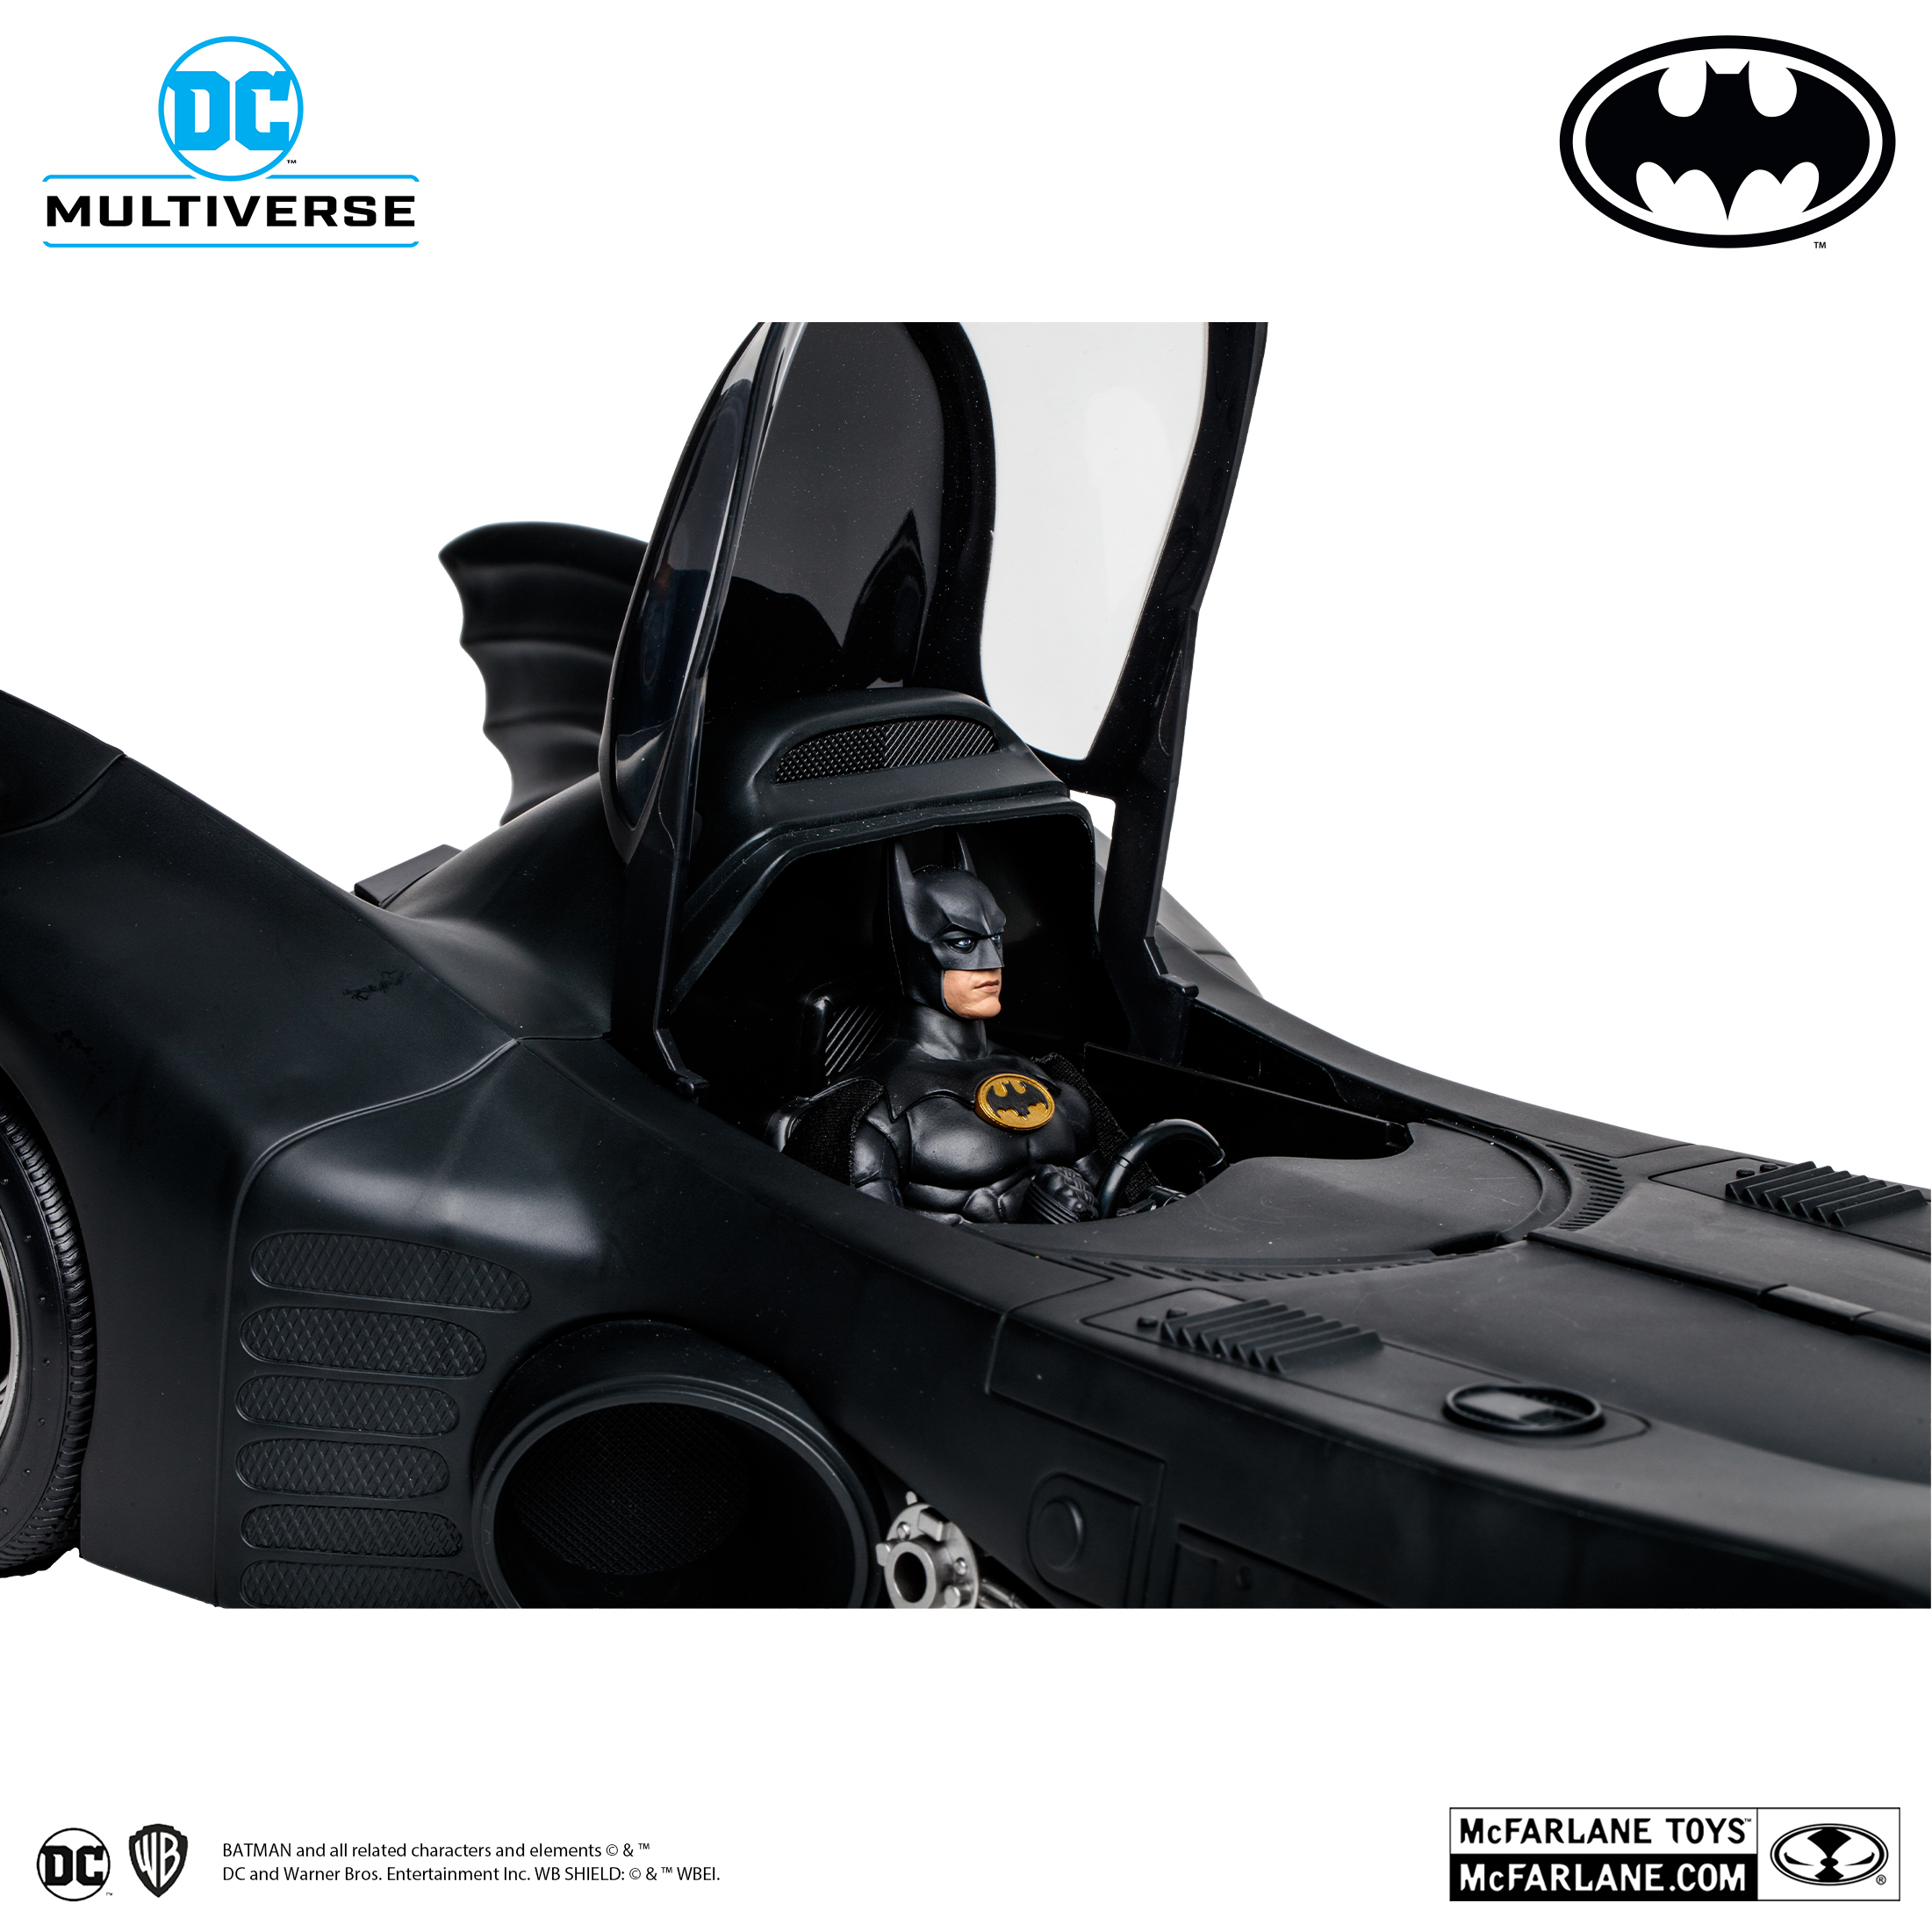 McFarlane Toys opens preorders for Gold Label 89 Batman with Batmobile